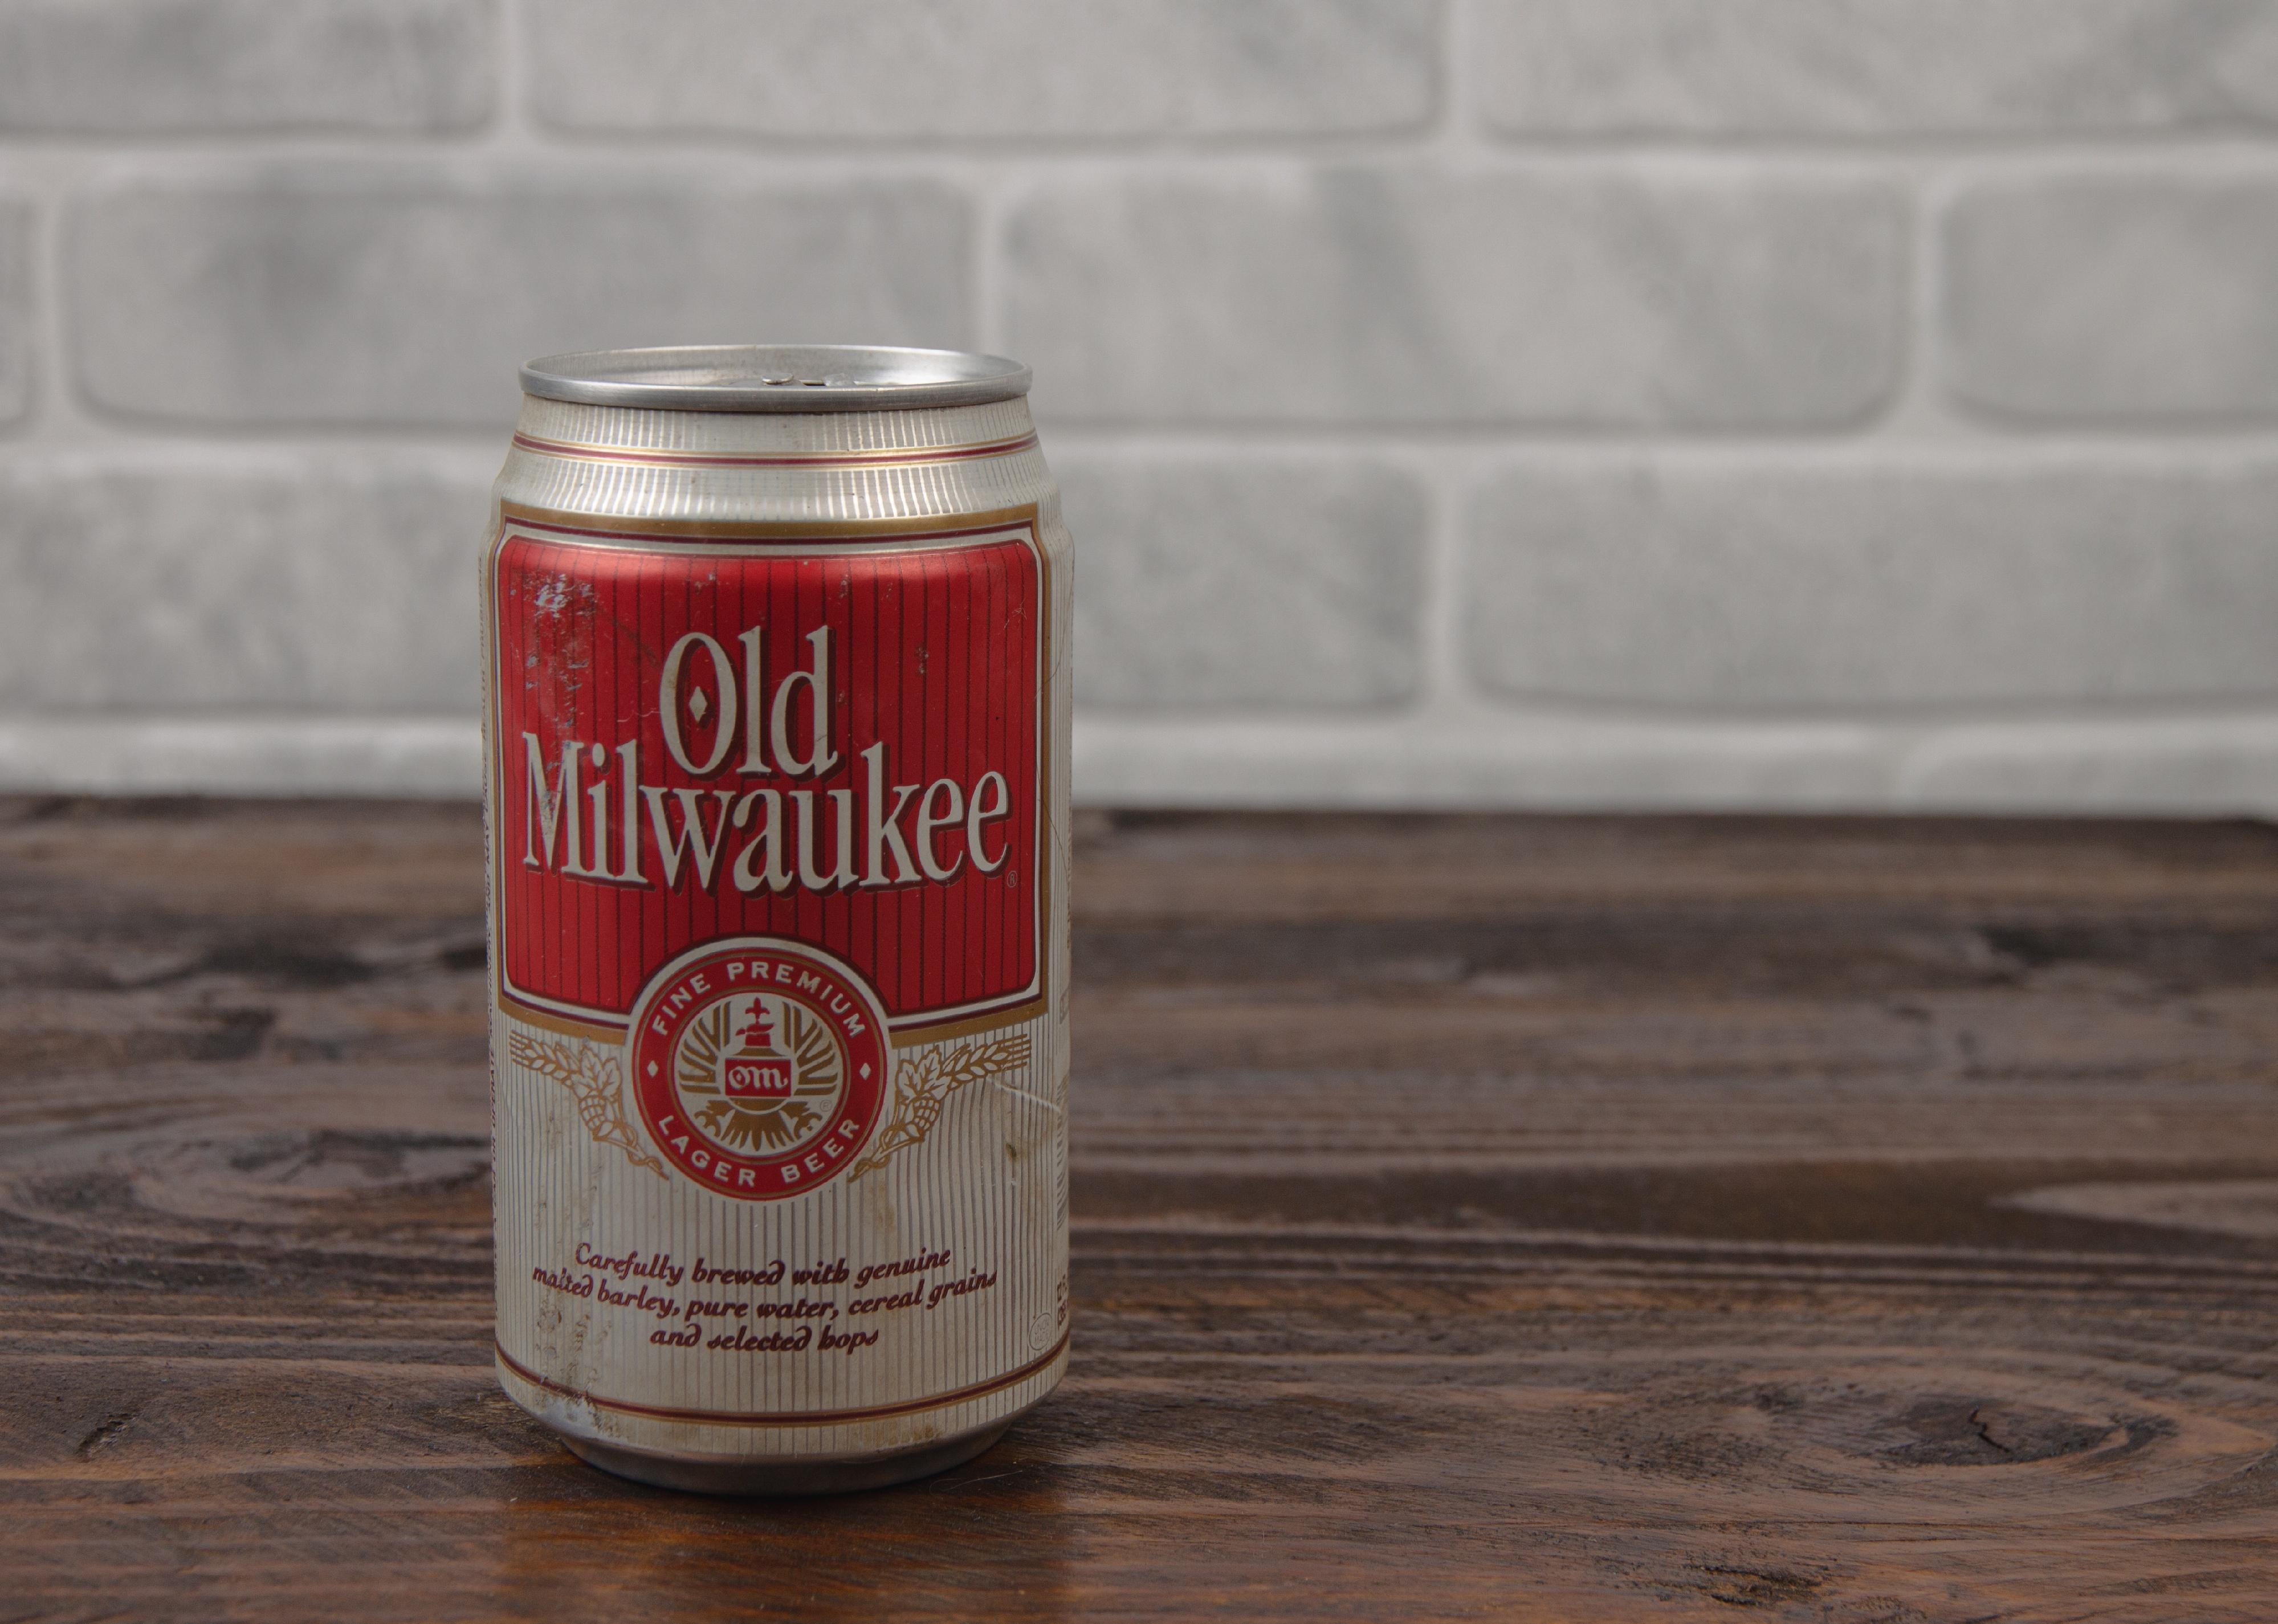 A vintage aluminium can of Old Milwaukee beer